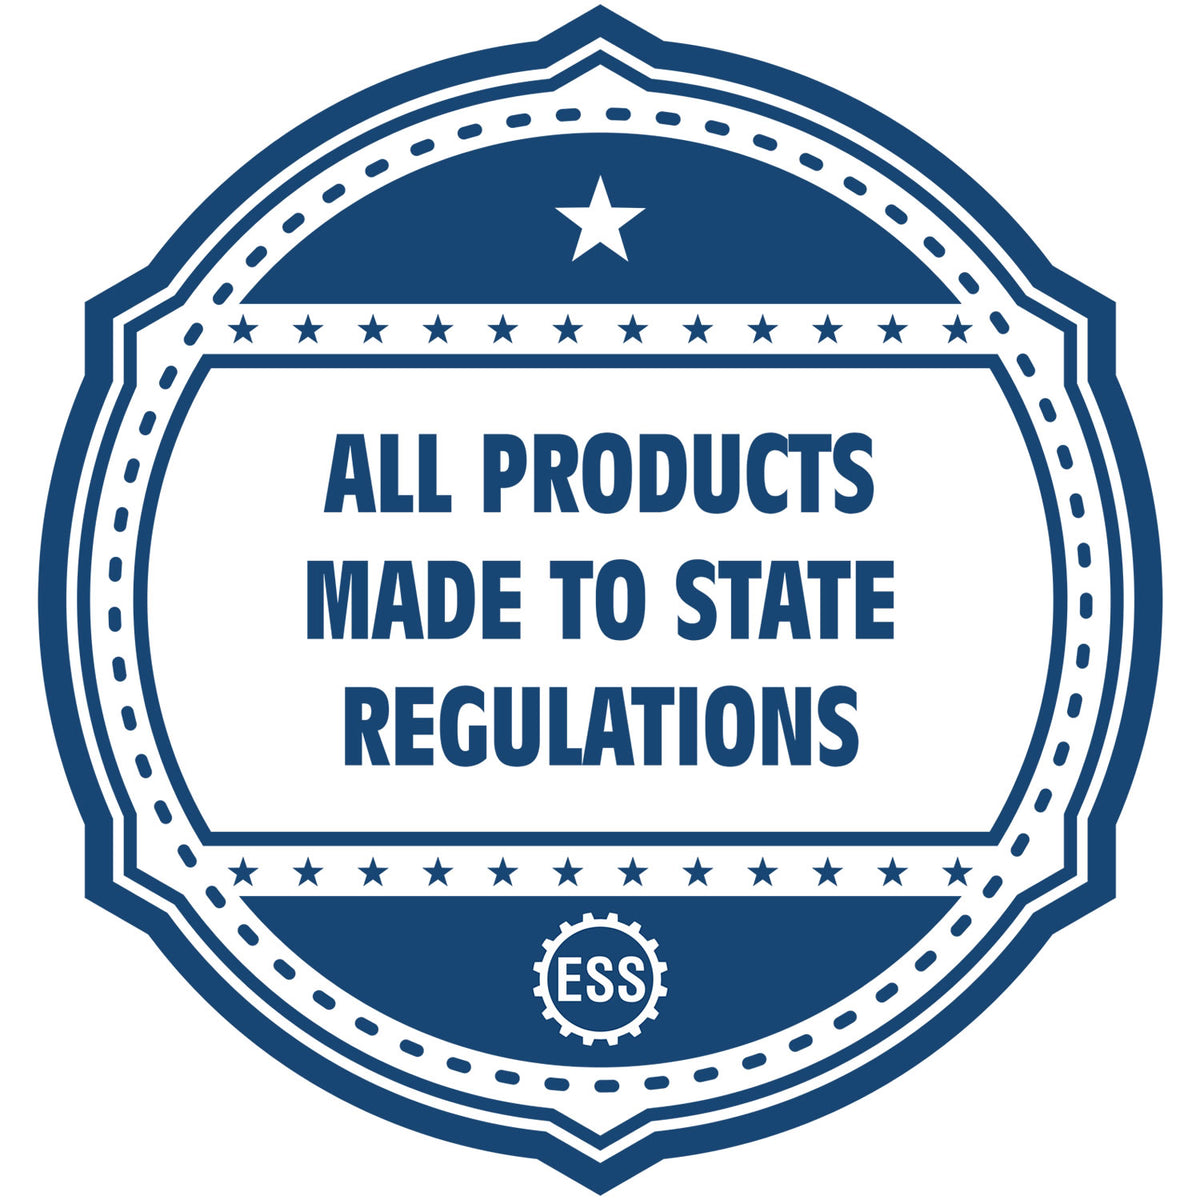 An icon or badge element for the Handheld Alabama Professional Engineer Embosser showing that this product is made in compliance with state regulations.